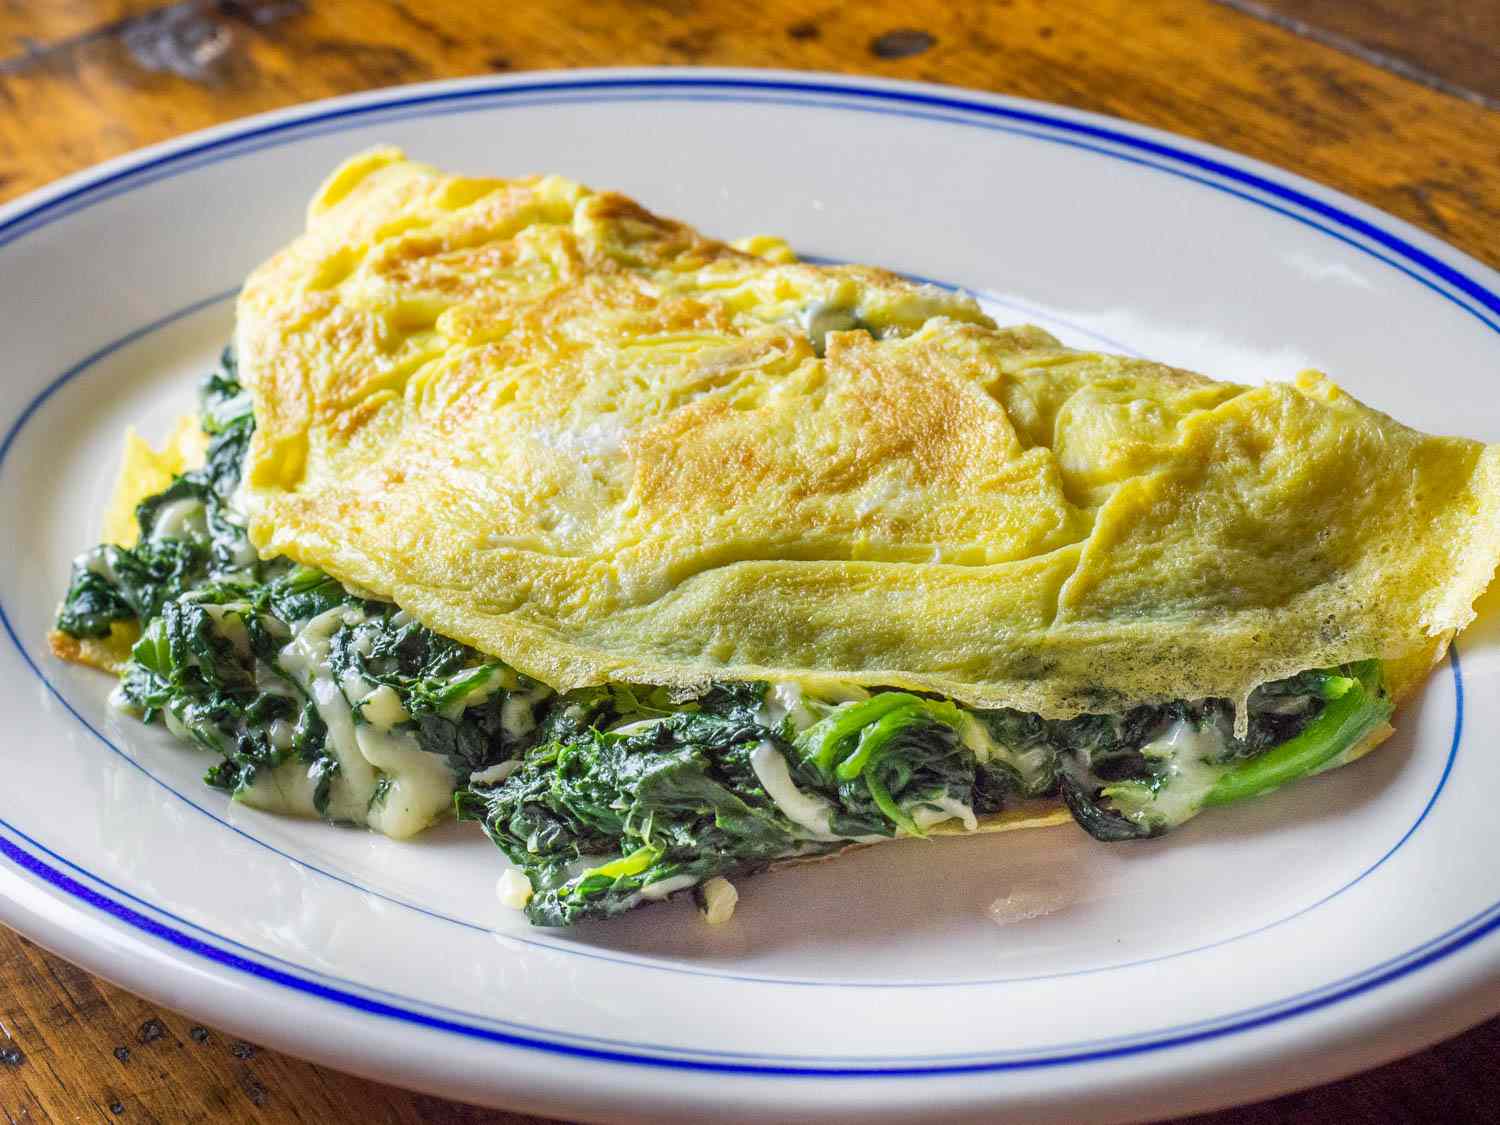 A spinach and cheese omelette plated